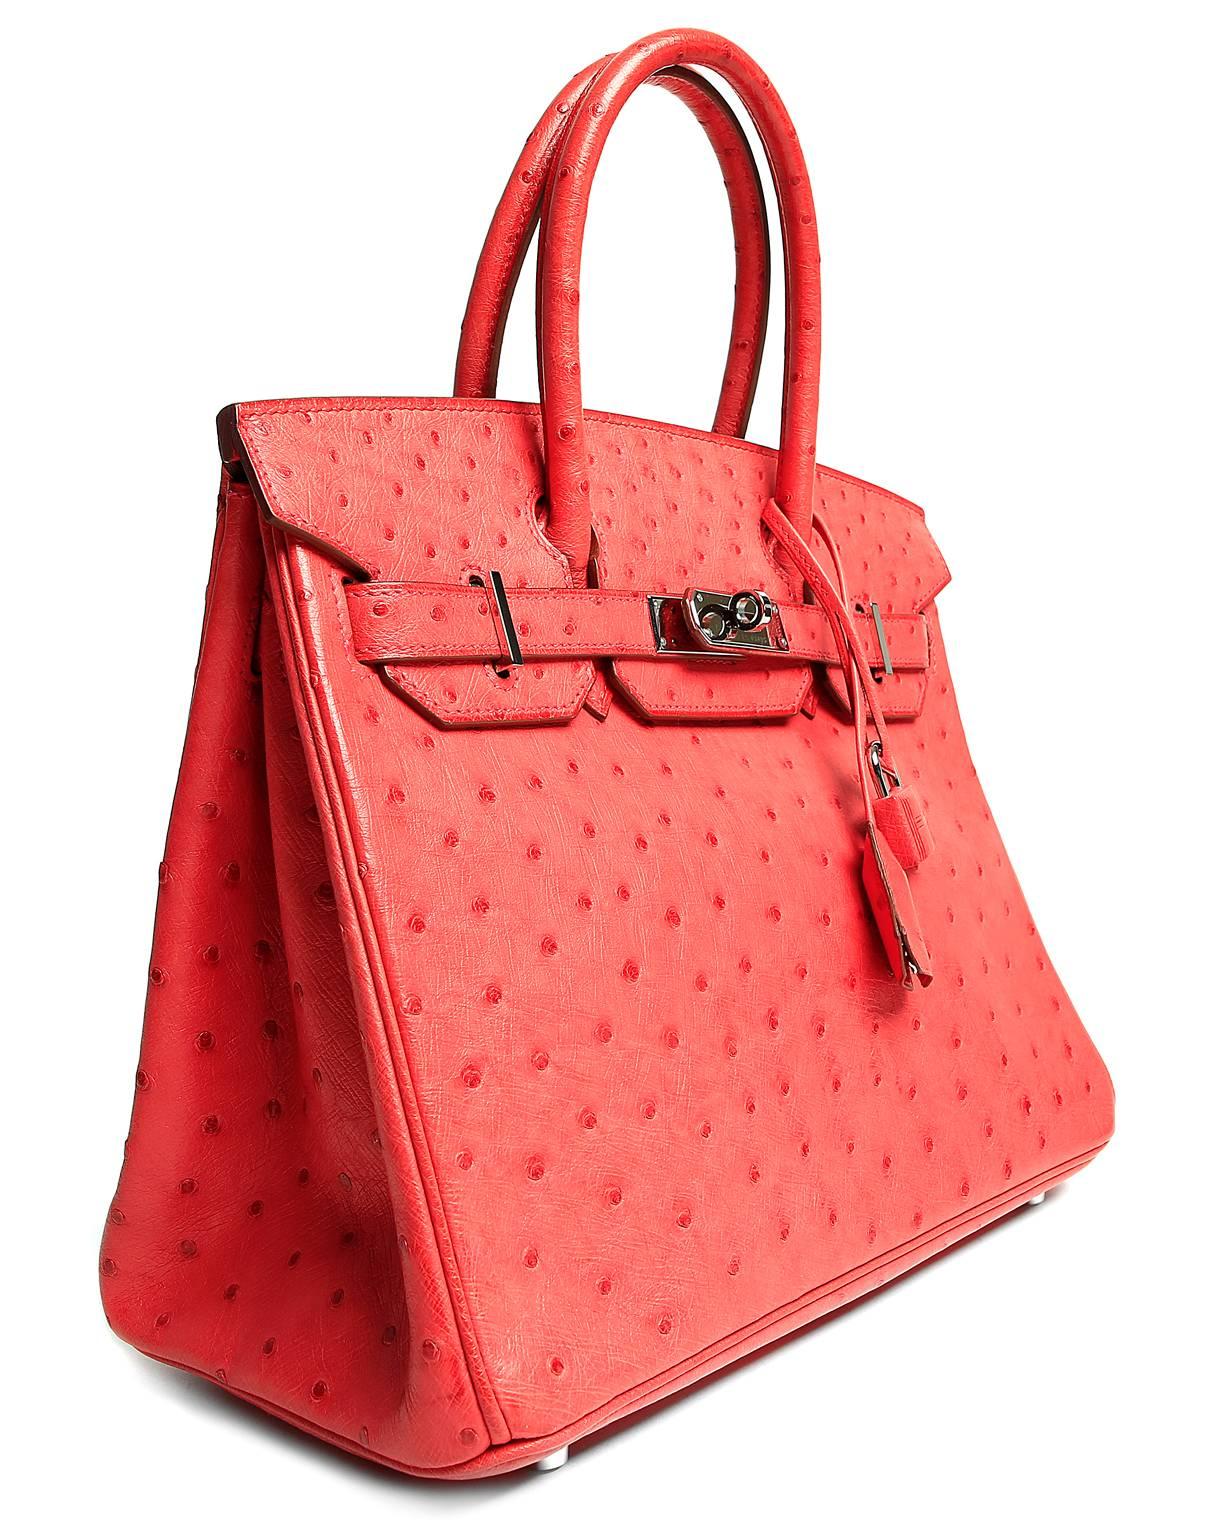 Hermès Bougainvillea Ostrich 30 cm Birkin appears in pristine condition, likely never carried.   Hermès bags are considered the ultimate luxury item the world over.  Hand stitched by skilled craftsmen, wait lists of a year or more are commonplace